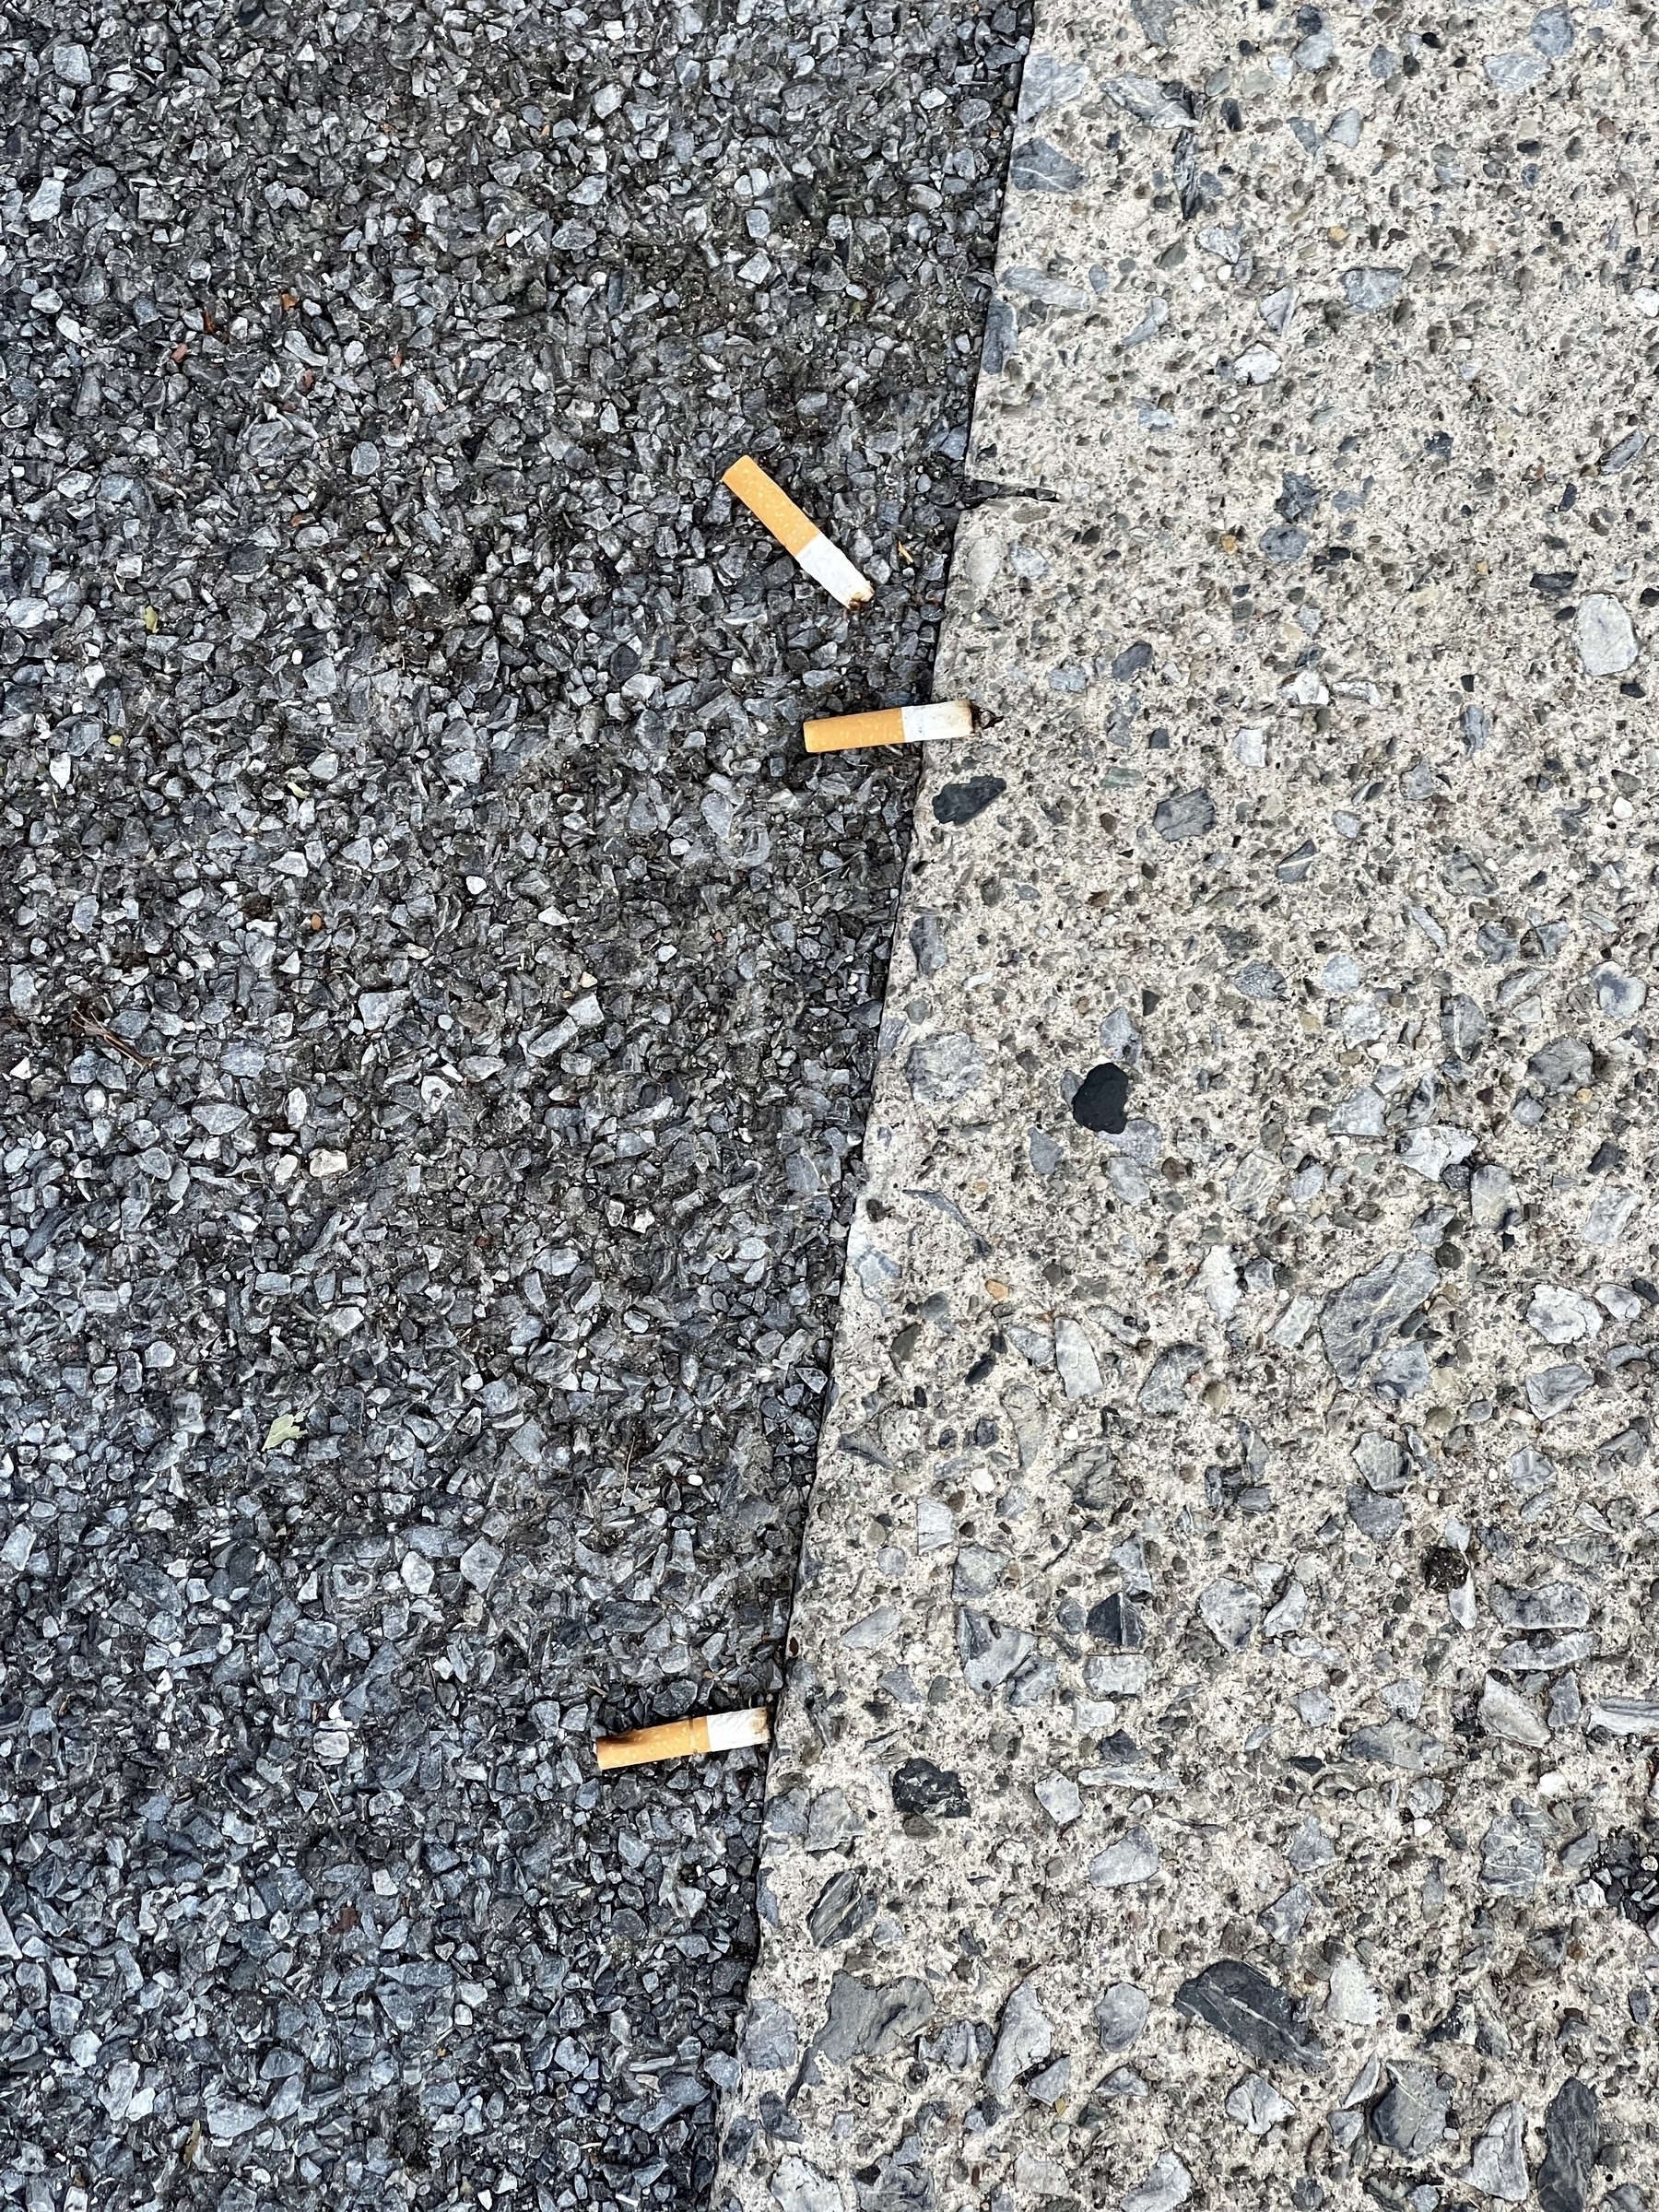 Three cigarette buts on asphalt and concrete pavement. The line between asphalt on the left, and concrete on the right runs at a slight diagonal from top to bottom in the middle. Cigarette buts are arrayed along the line.